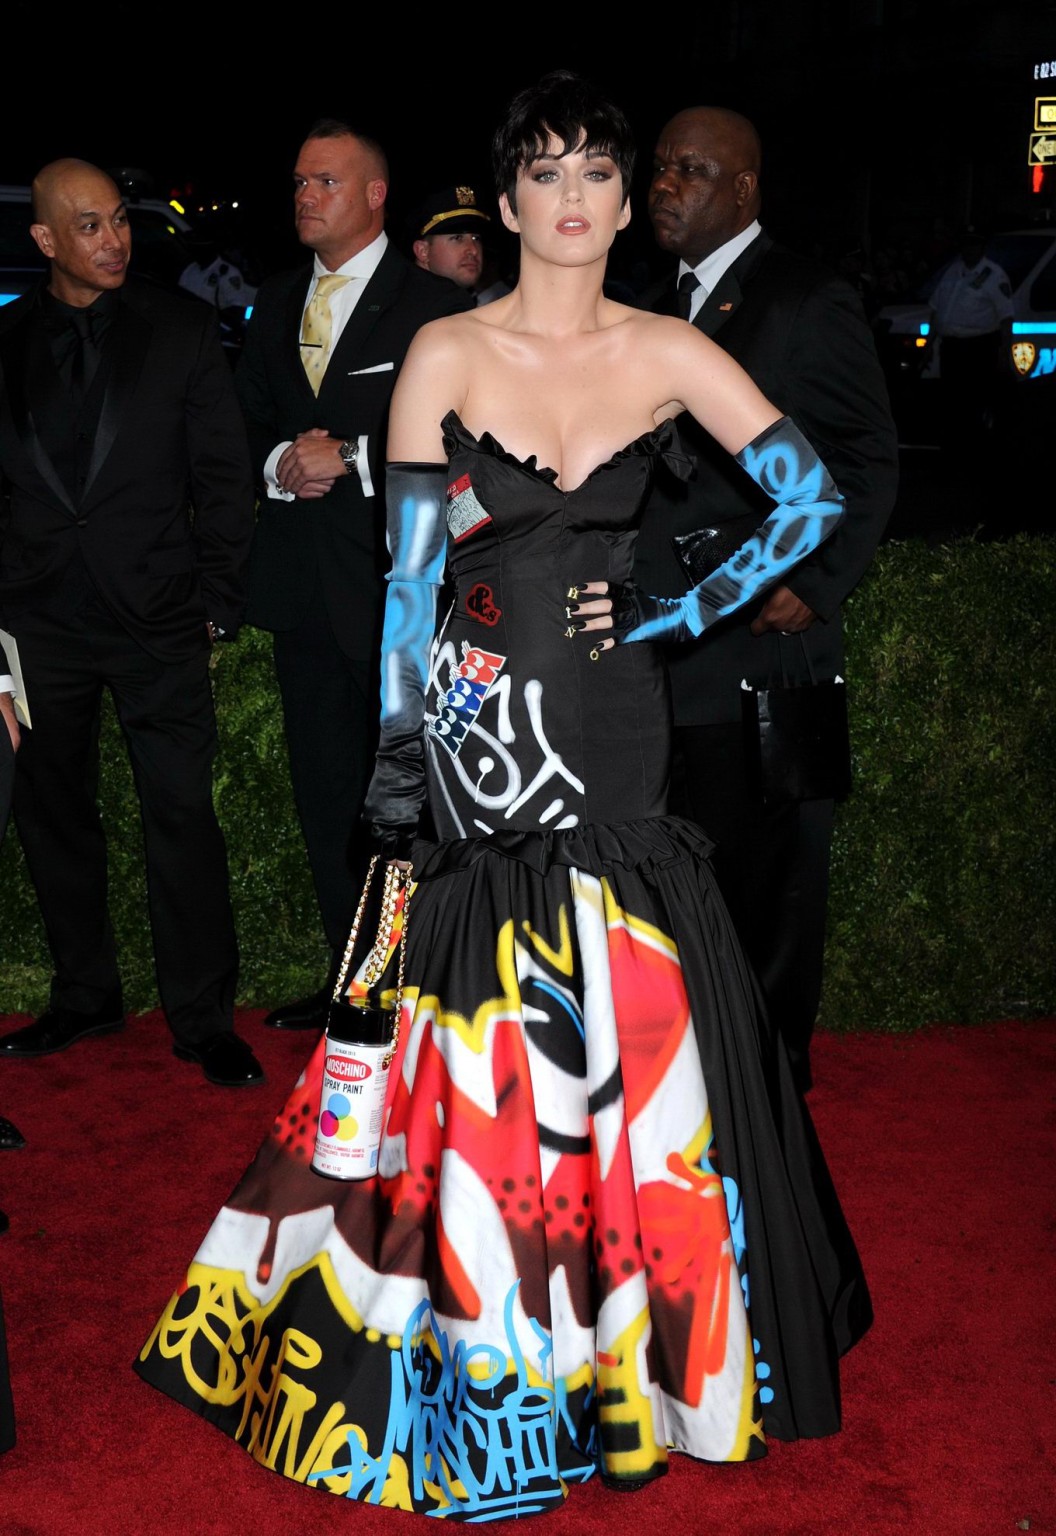 Katy Perry showing huge cleavage at the Costume Institute Benefit Gala at the Me